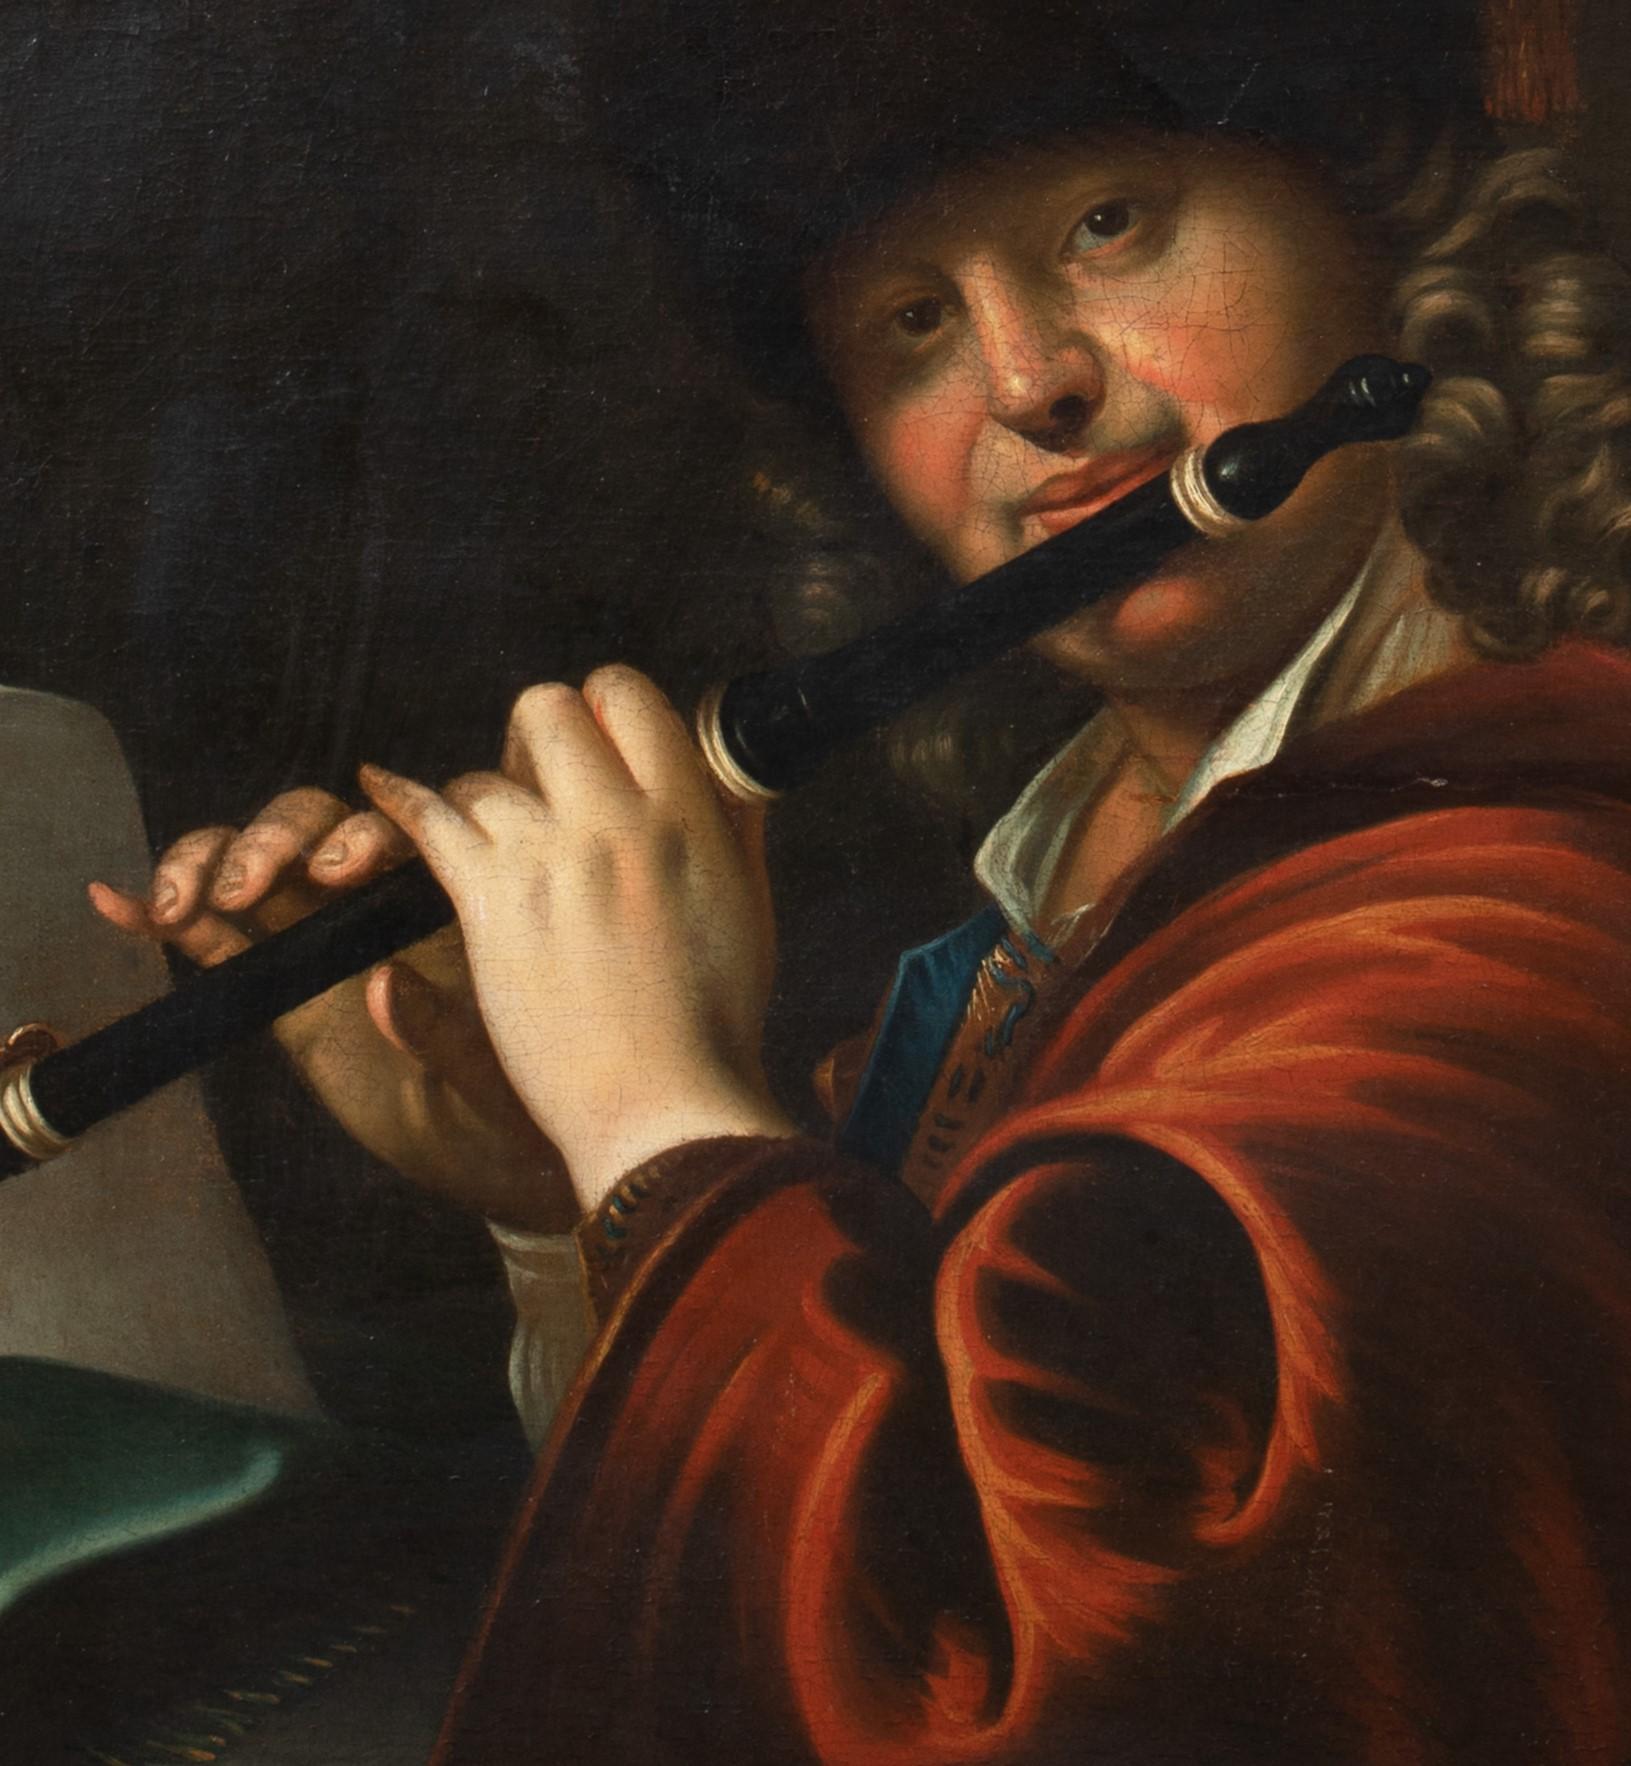 PORTRAIT OF COURT MUSICIAN JOSEF LEMBERGER (1667-1740)

Hungarian School

Large 18th Century Hungarian Portrait of court musician Josef Lemberger, oil on canvas. Superb quality and early important portrait of the Hungarian Court musician playing the